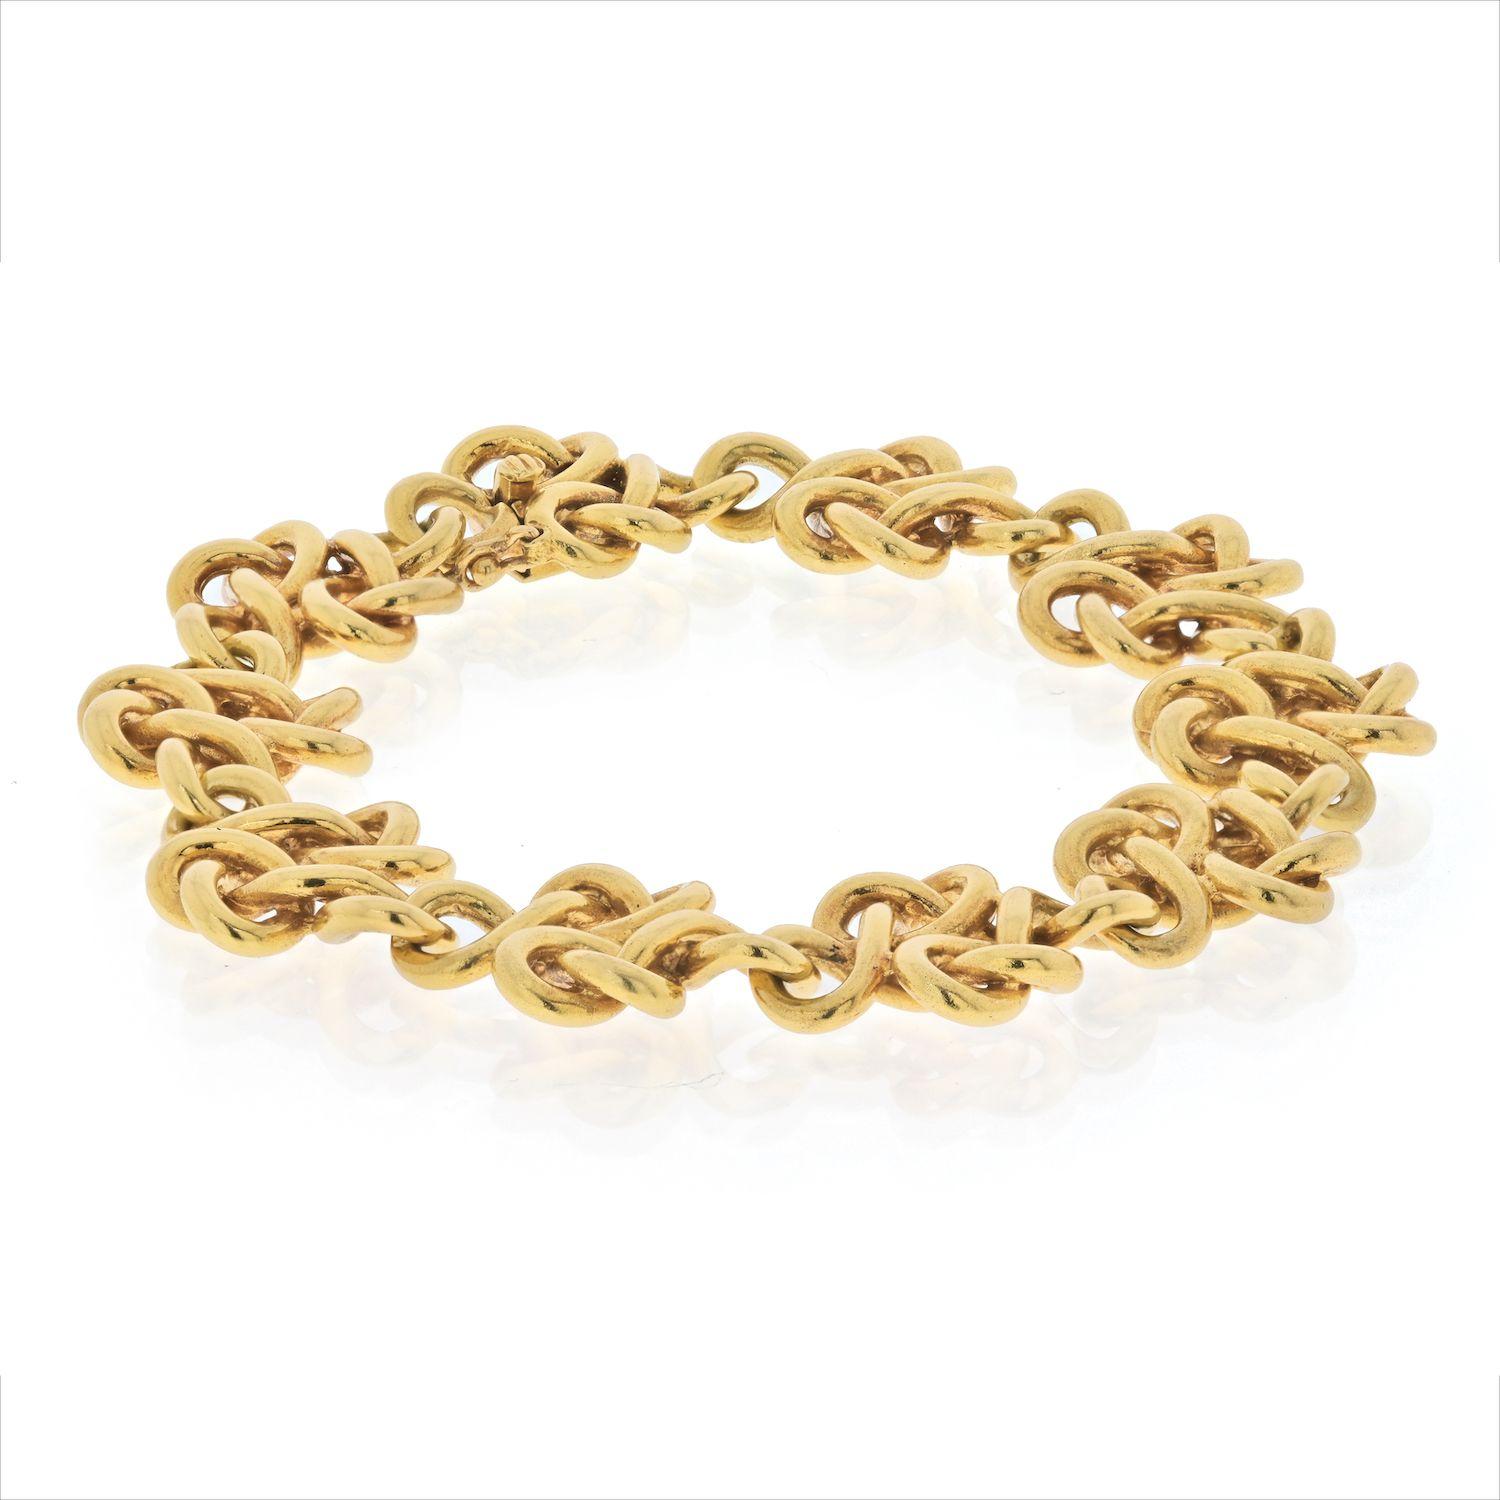 Van Cleef & Arpels 18K Yellow Gold Delicate Braided Open Link Bracelet.
This beautiful bracelet is 7 inches long and is polished to perfection. Smooth links will feel great on your skin and stack well with other vintage bracelets. 
Own this